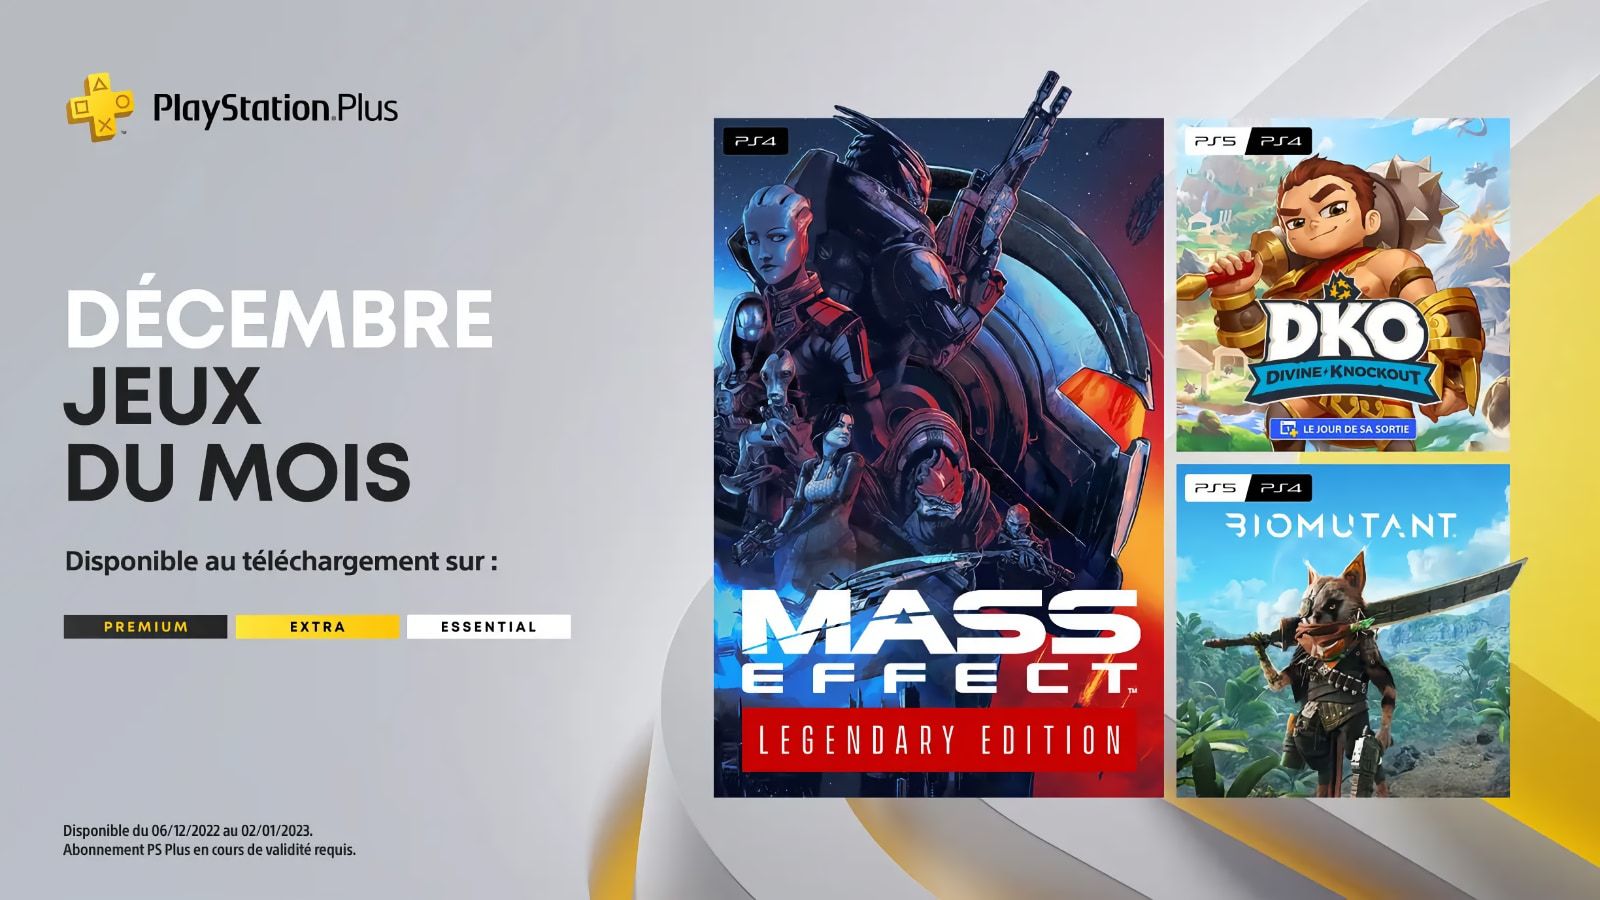 ps plus december 2022 free playstation games mass effect